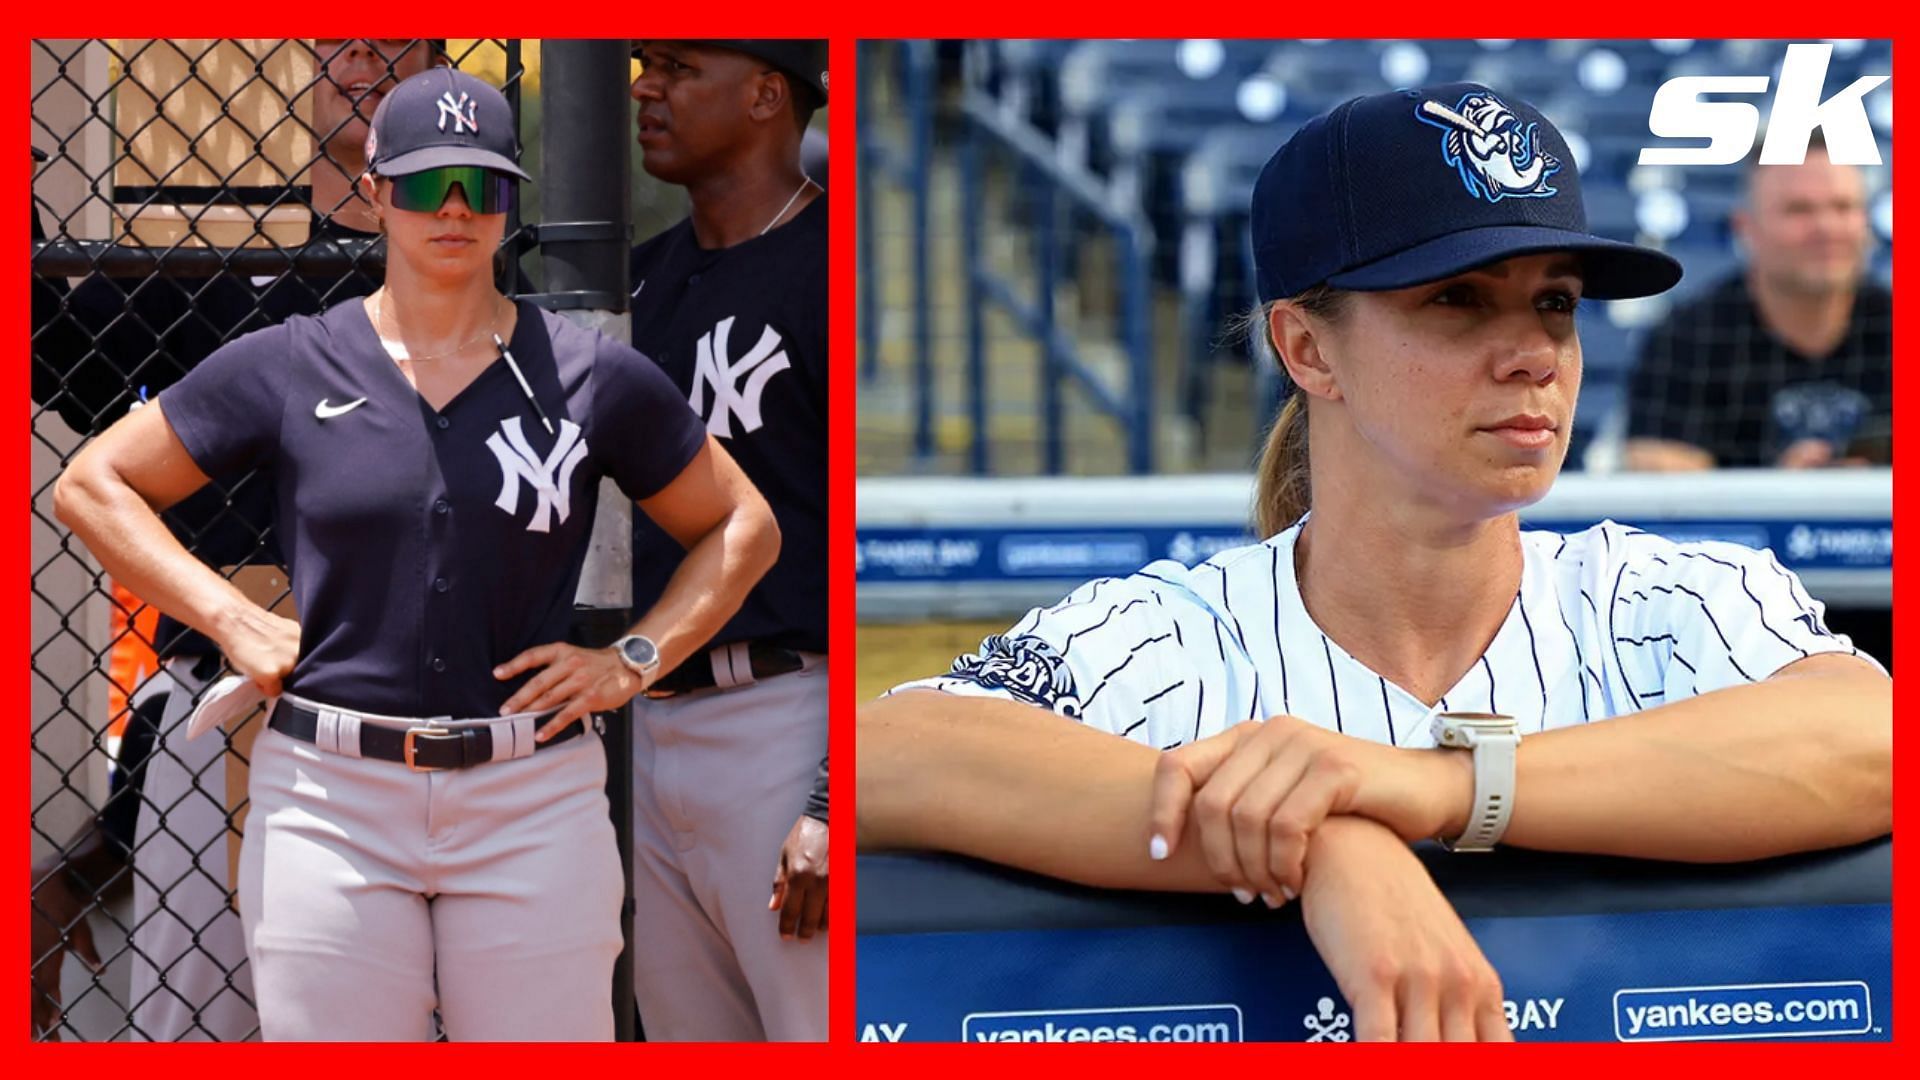 Why did Rachel Balkovec get ejected? Exploring why Yankees minor